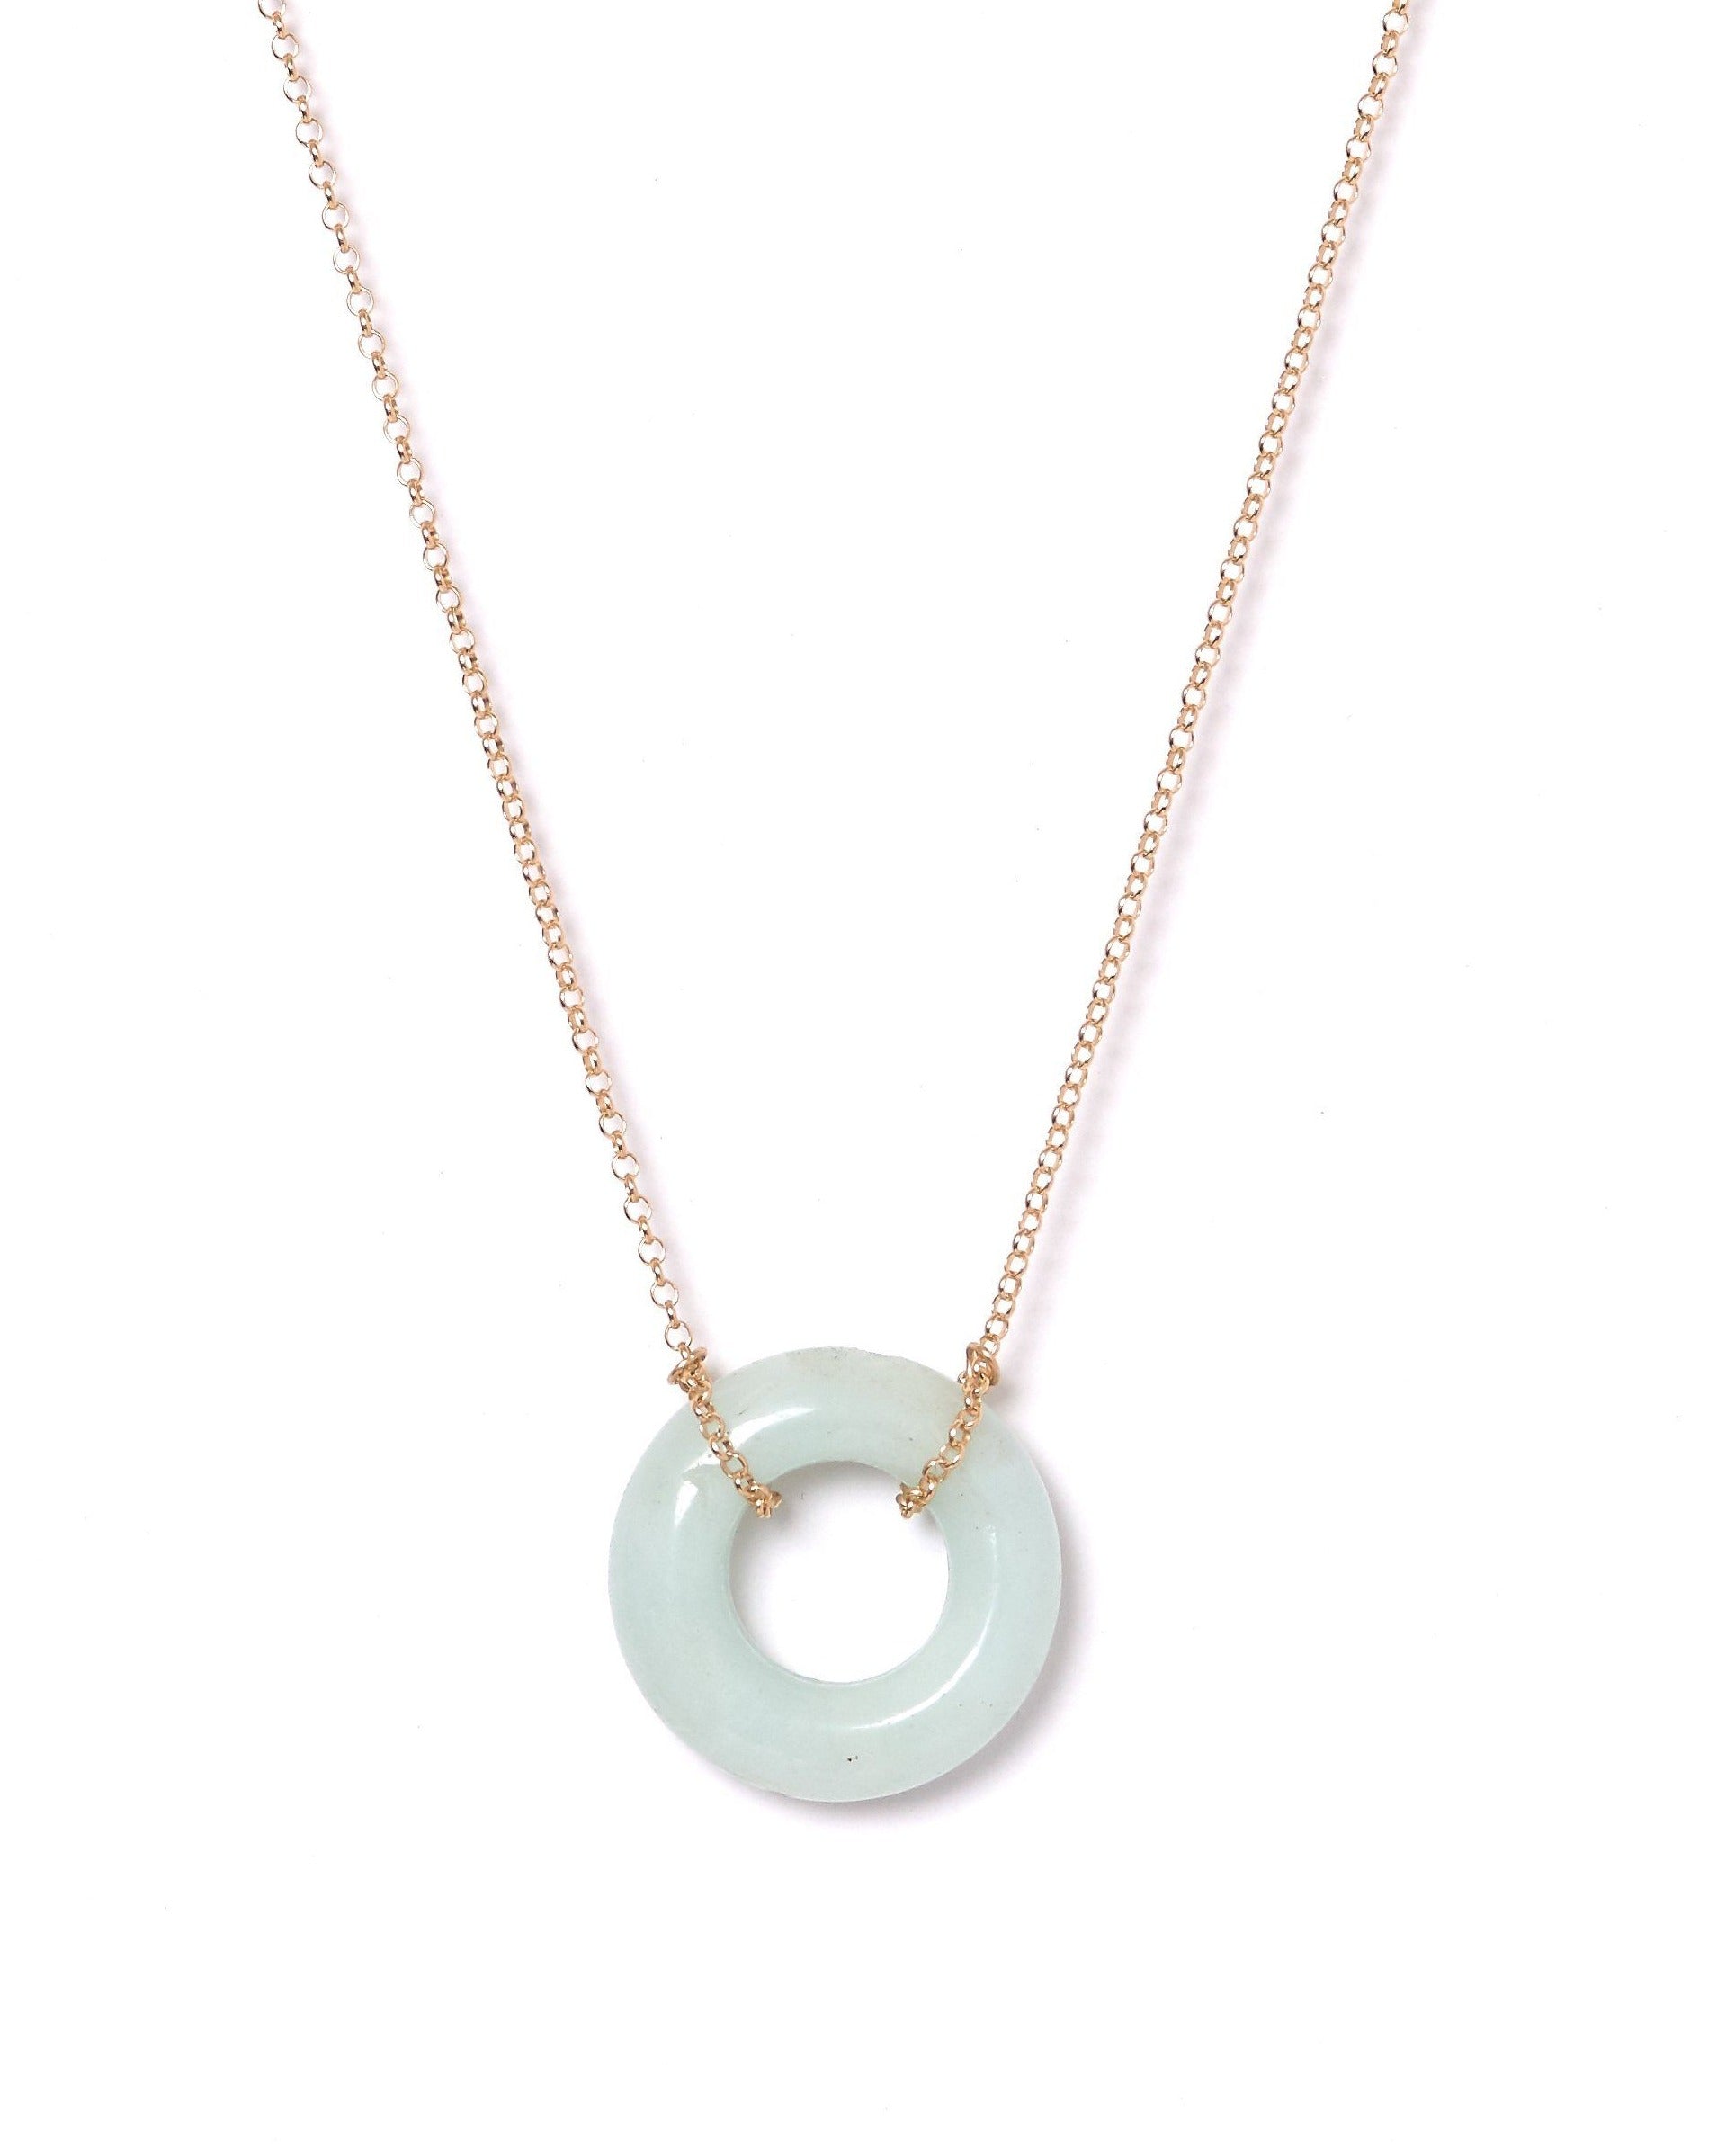 Cerceau Necklace by KOZAKH. A 17 inch long necklace in 14K Gold Filled, featuring a doughnut shape Amazonite gemstone.